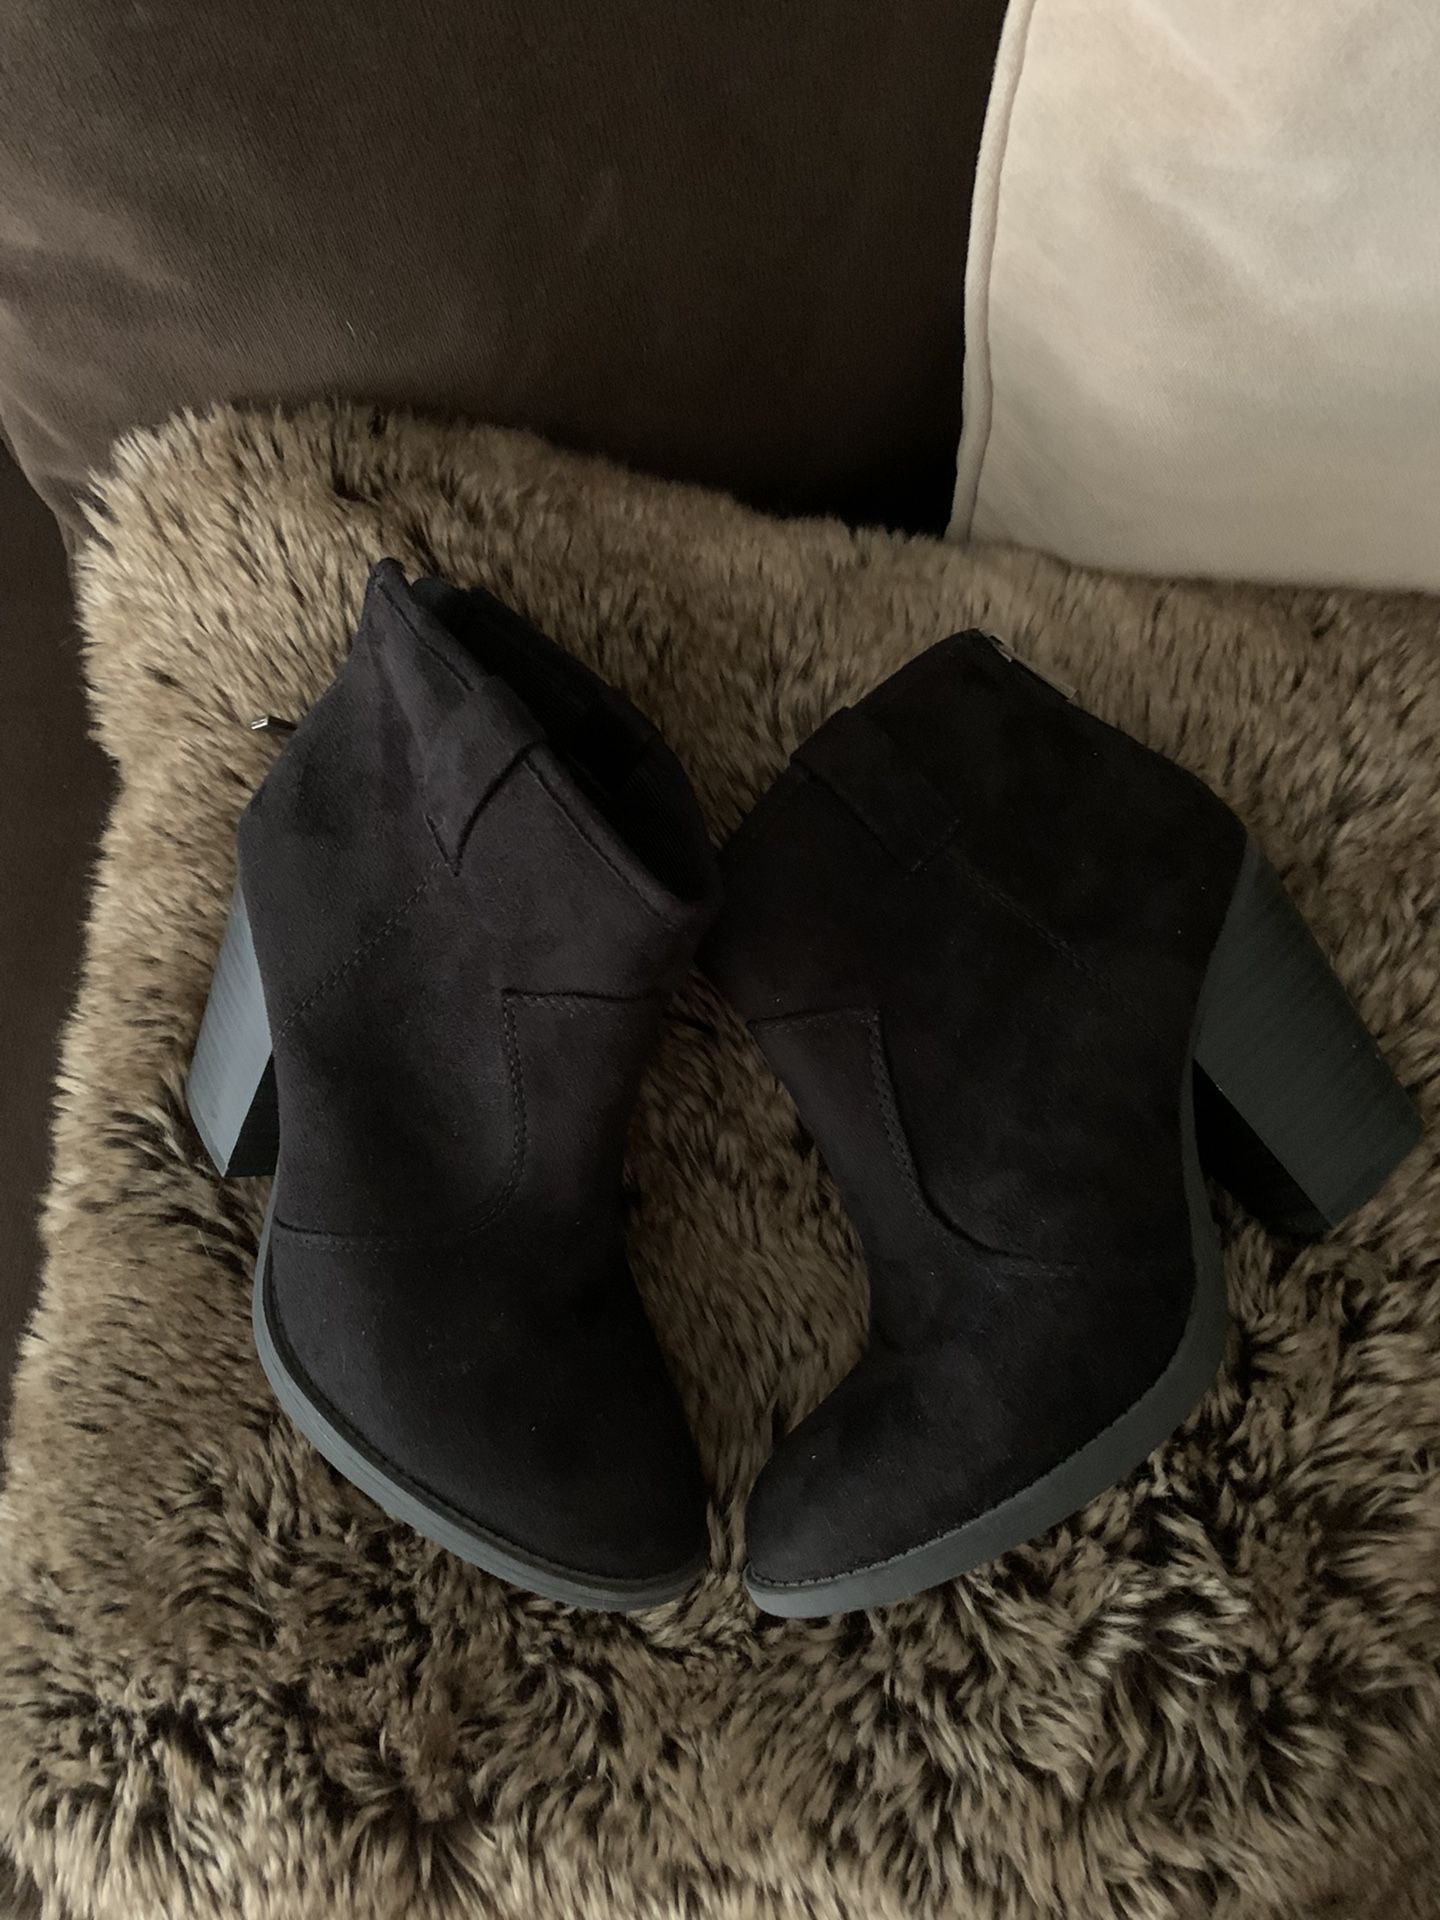 Black Booties For $13.00